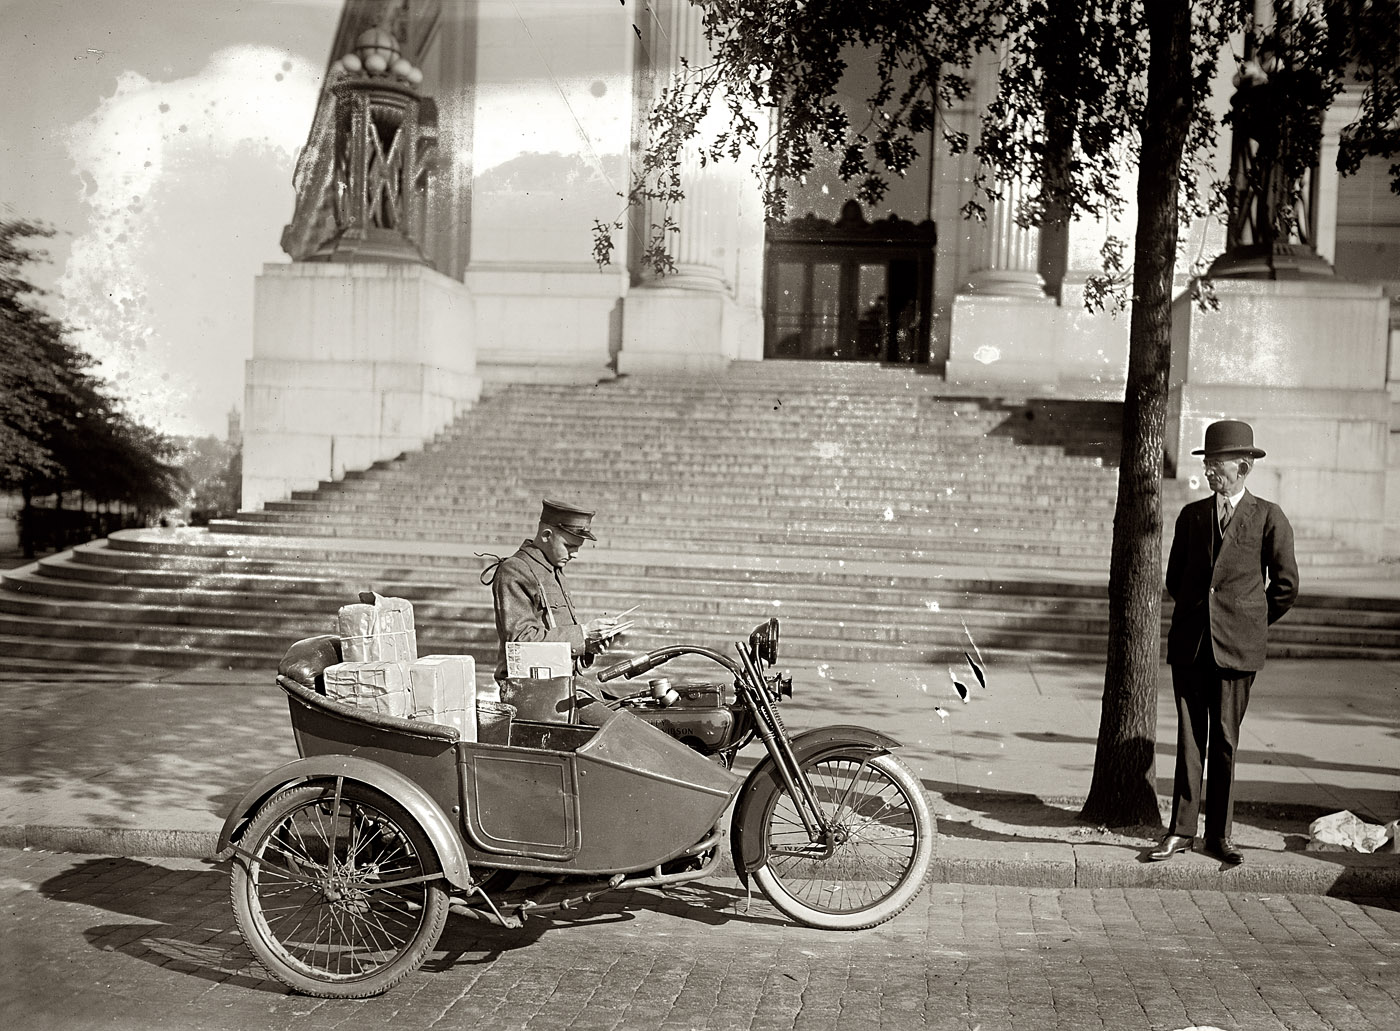 Washington, D.C., mail delivery via Harley-Davidson motorcycle sidecar circa 1924. National Photo Company Collection glass negative. View full size.